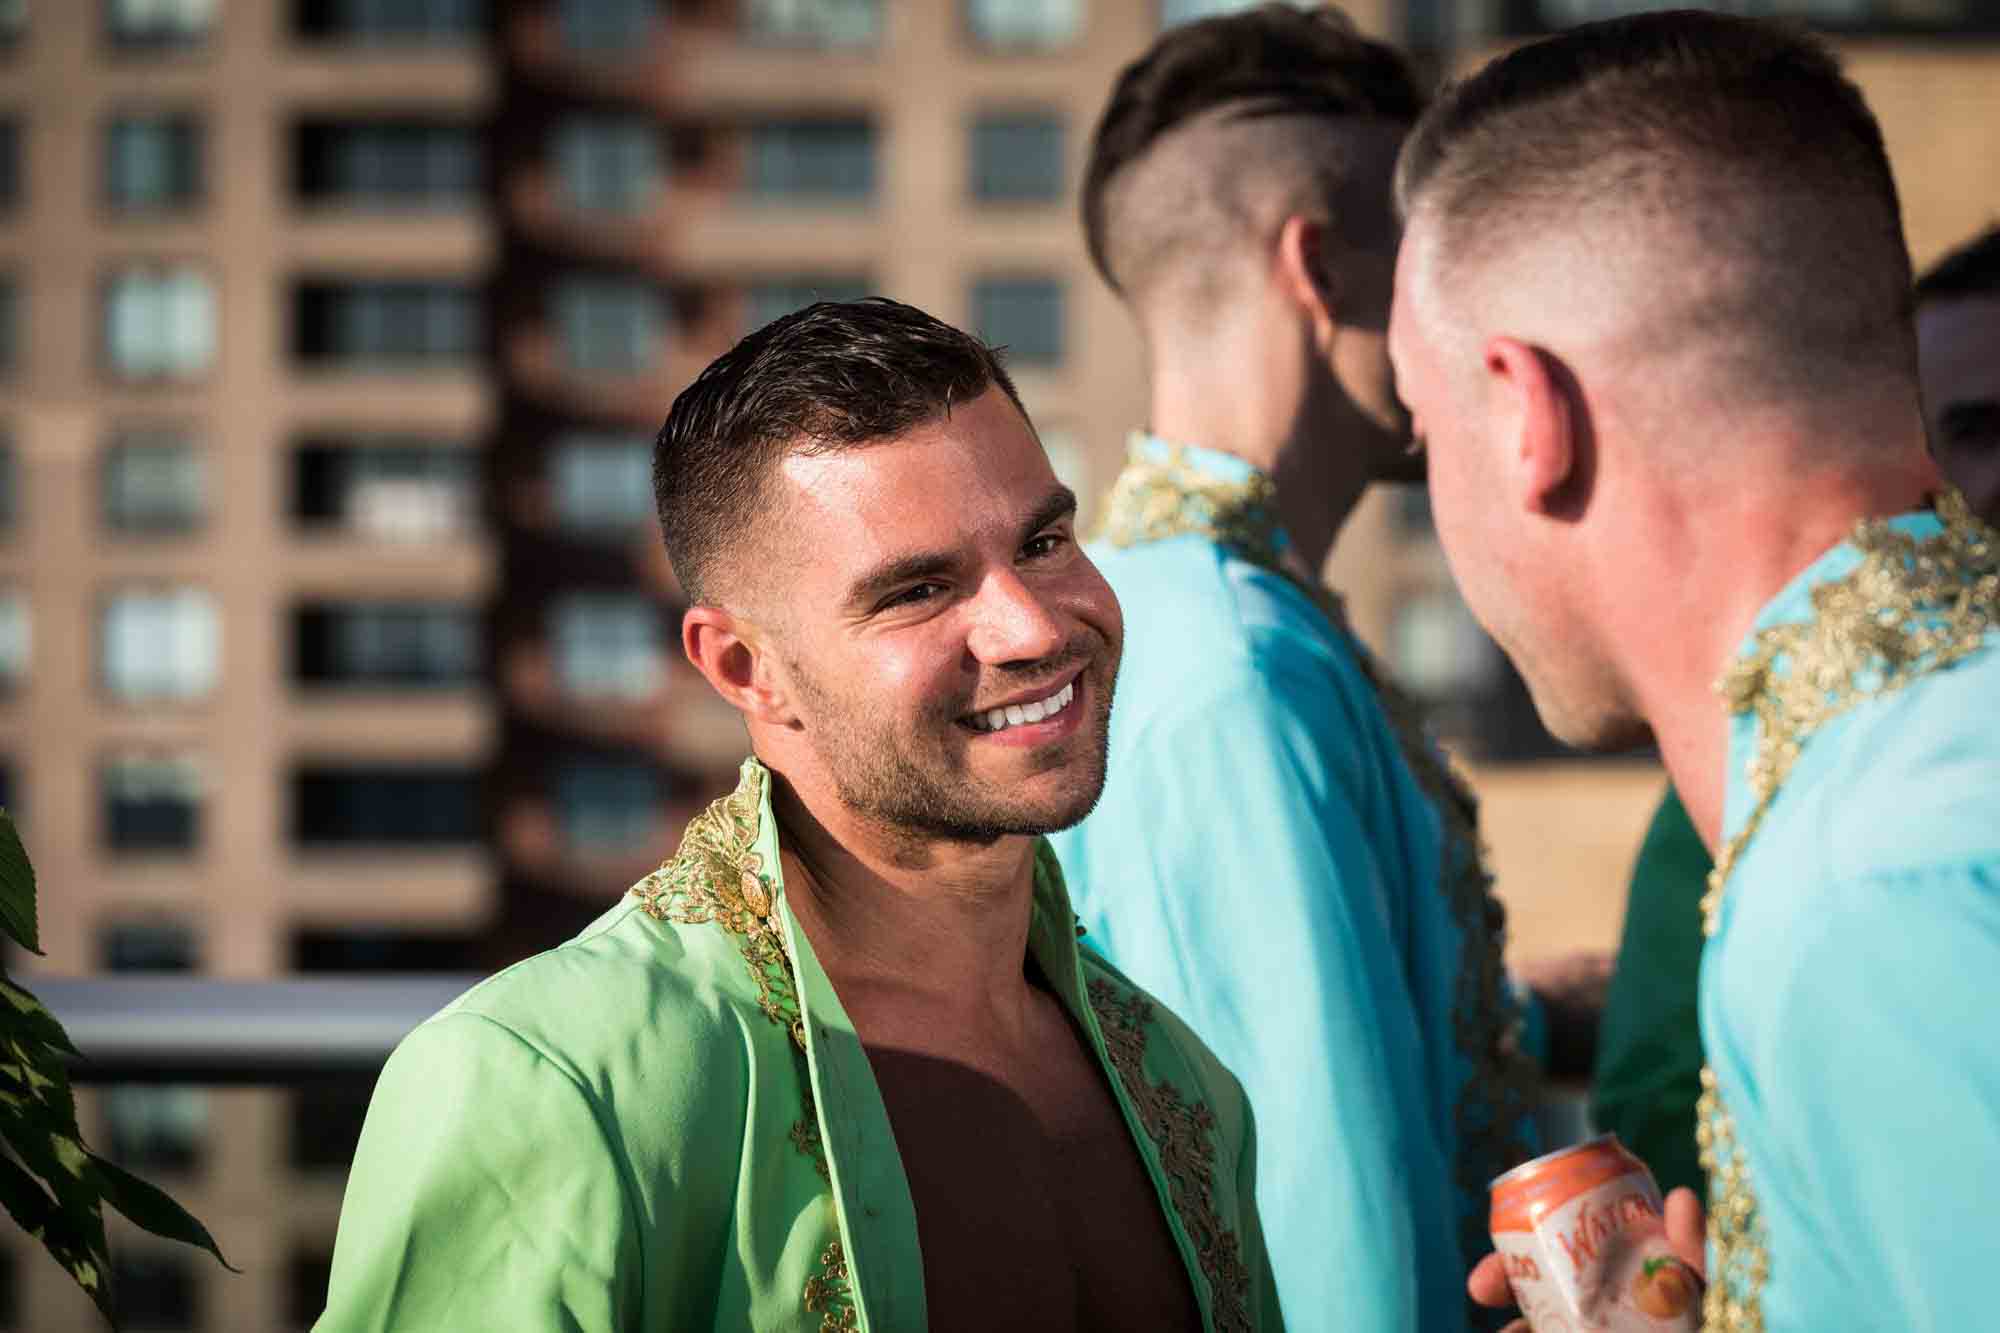 Guest wearing green jacket enjoying a Marie Antoinette-themed party on an outdoor patio in NYC